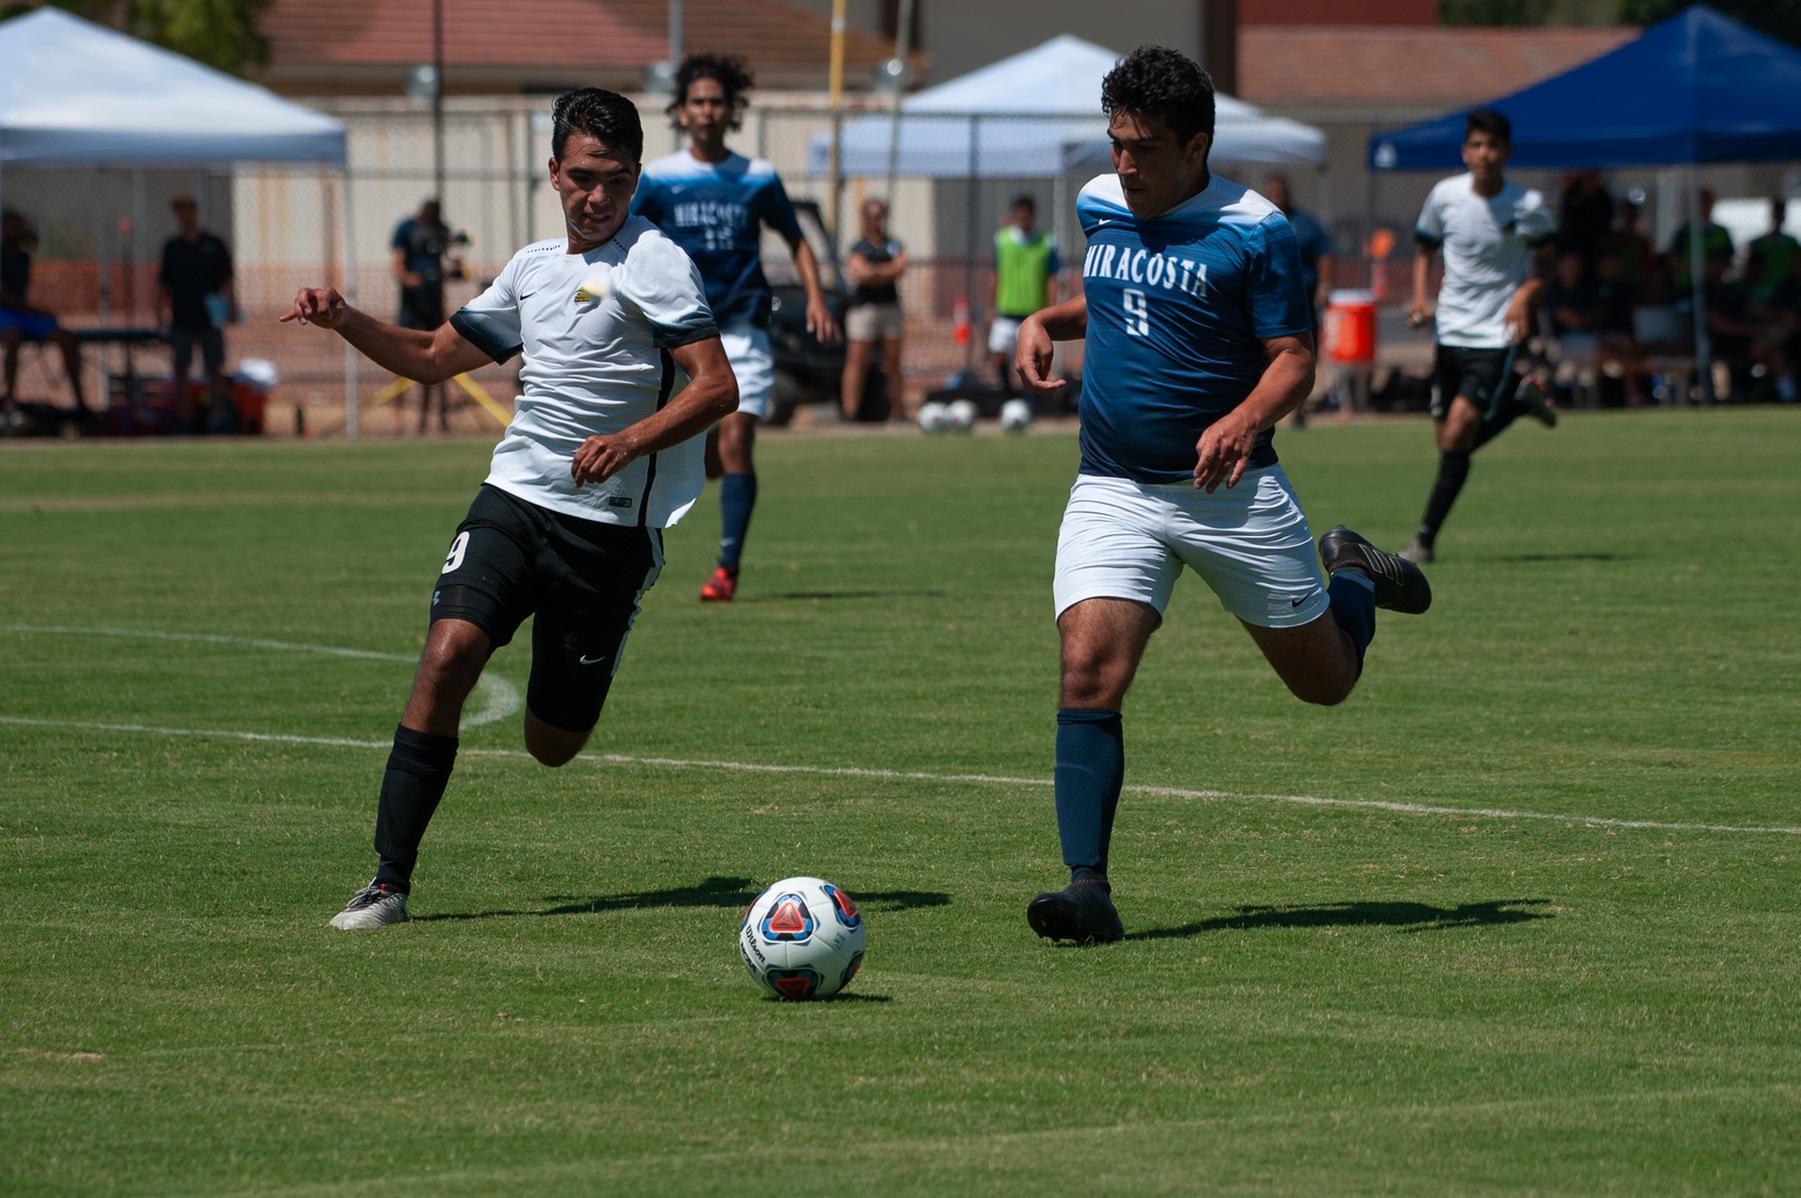 Julio Costa runs after the ball in an attempt to score.